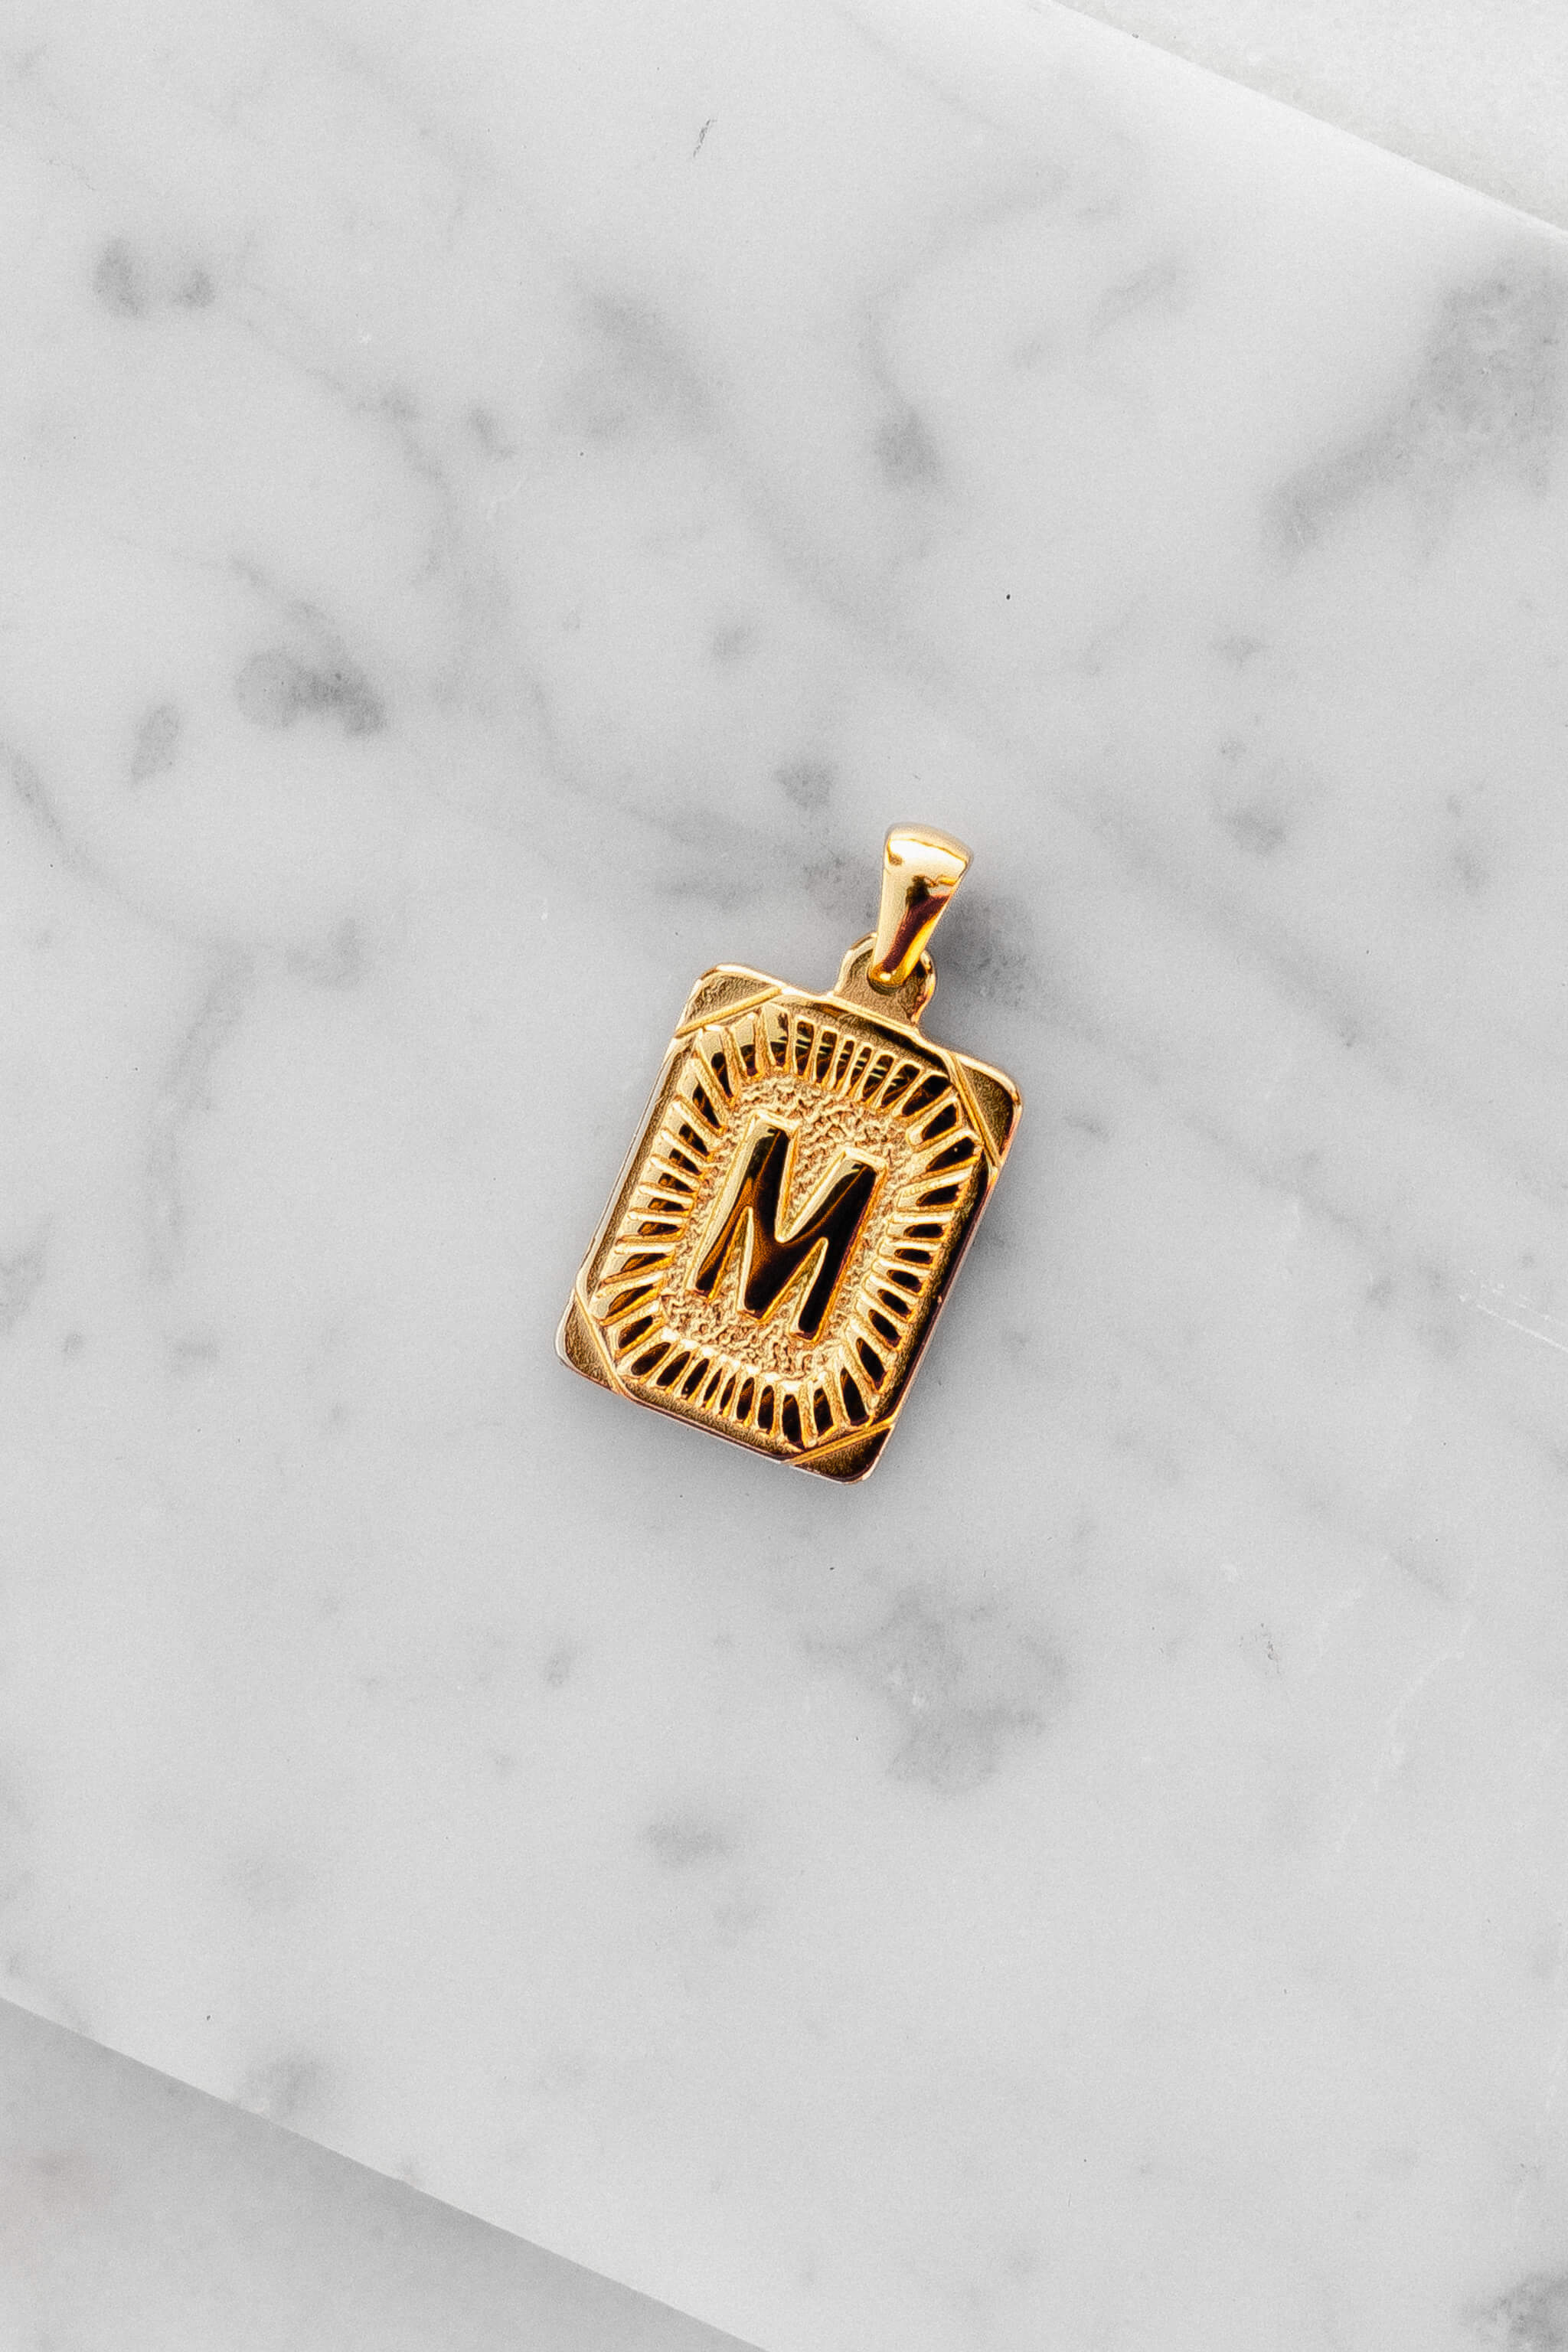 Gold Monogram Letter "M" Charm laying on a marble